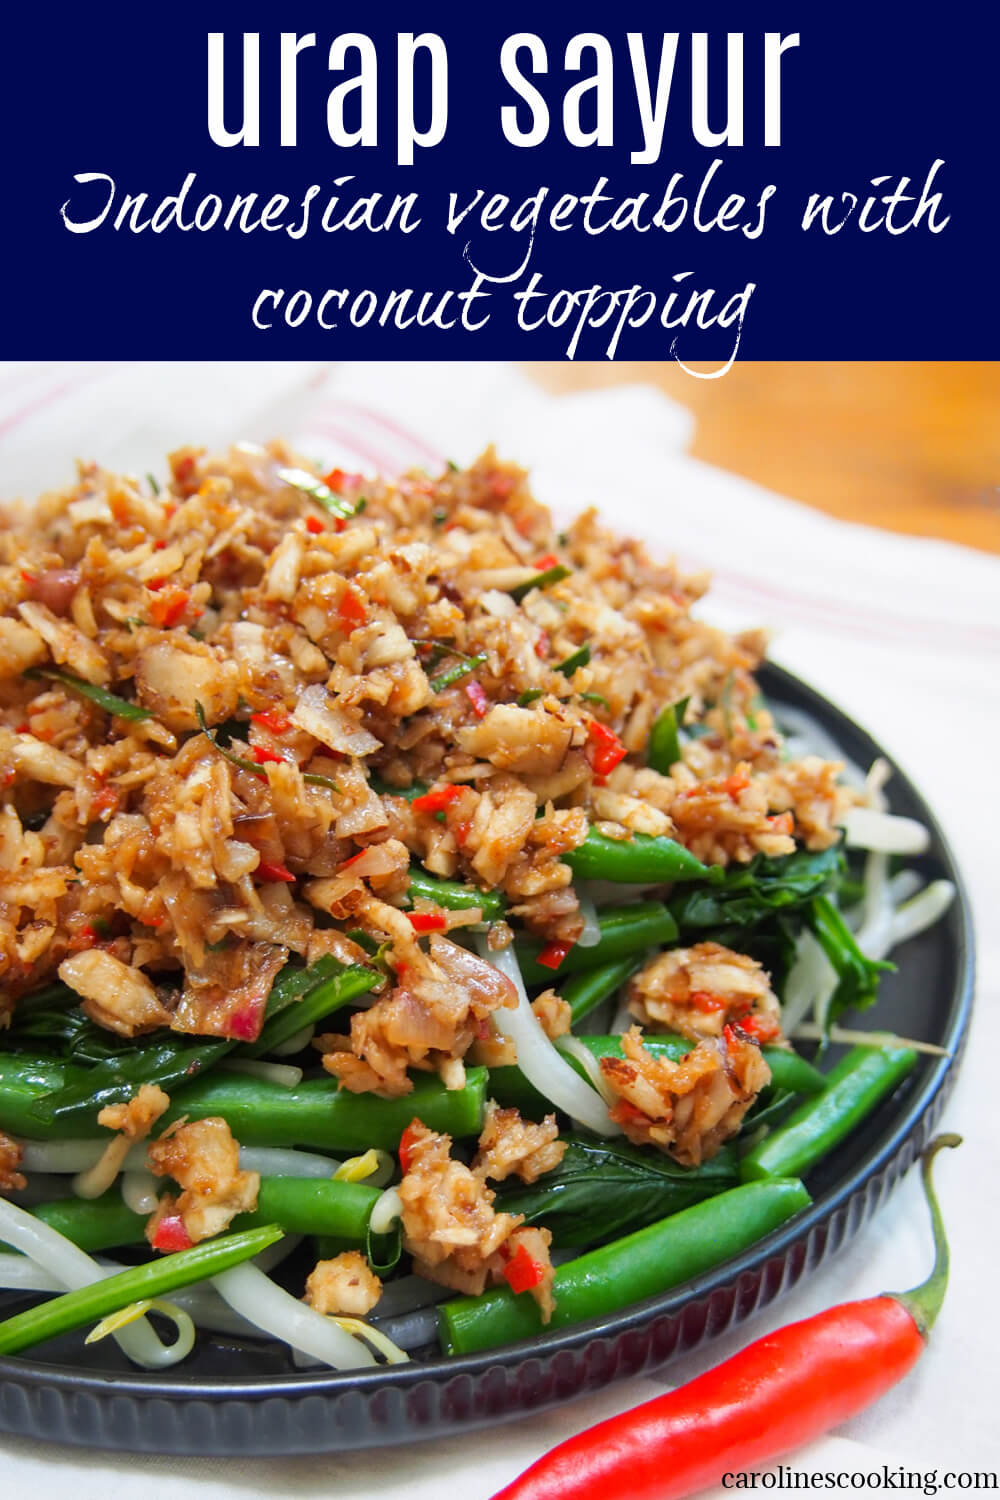 Urap sayur is a popular Indonesian dish combining blanched vegetables with a spiced coconut topping.  It's easy to make with a delicious combination of spicy, sweet and sour flavors.  Perfect as a side or filled out as a hand.